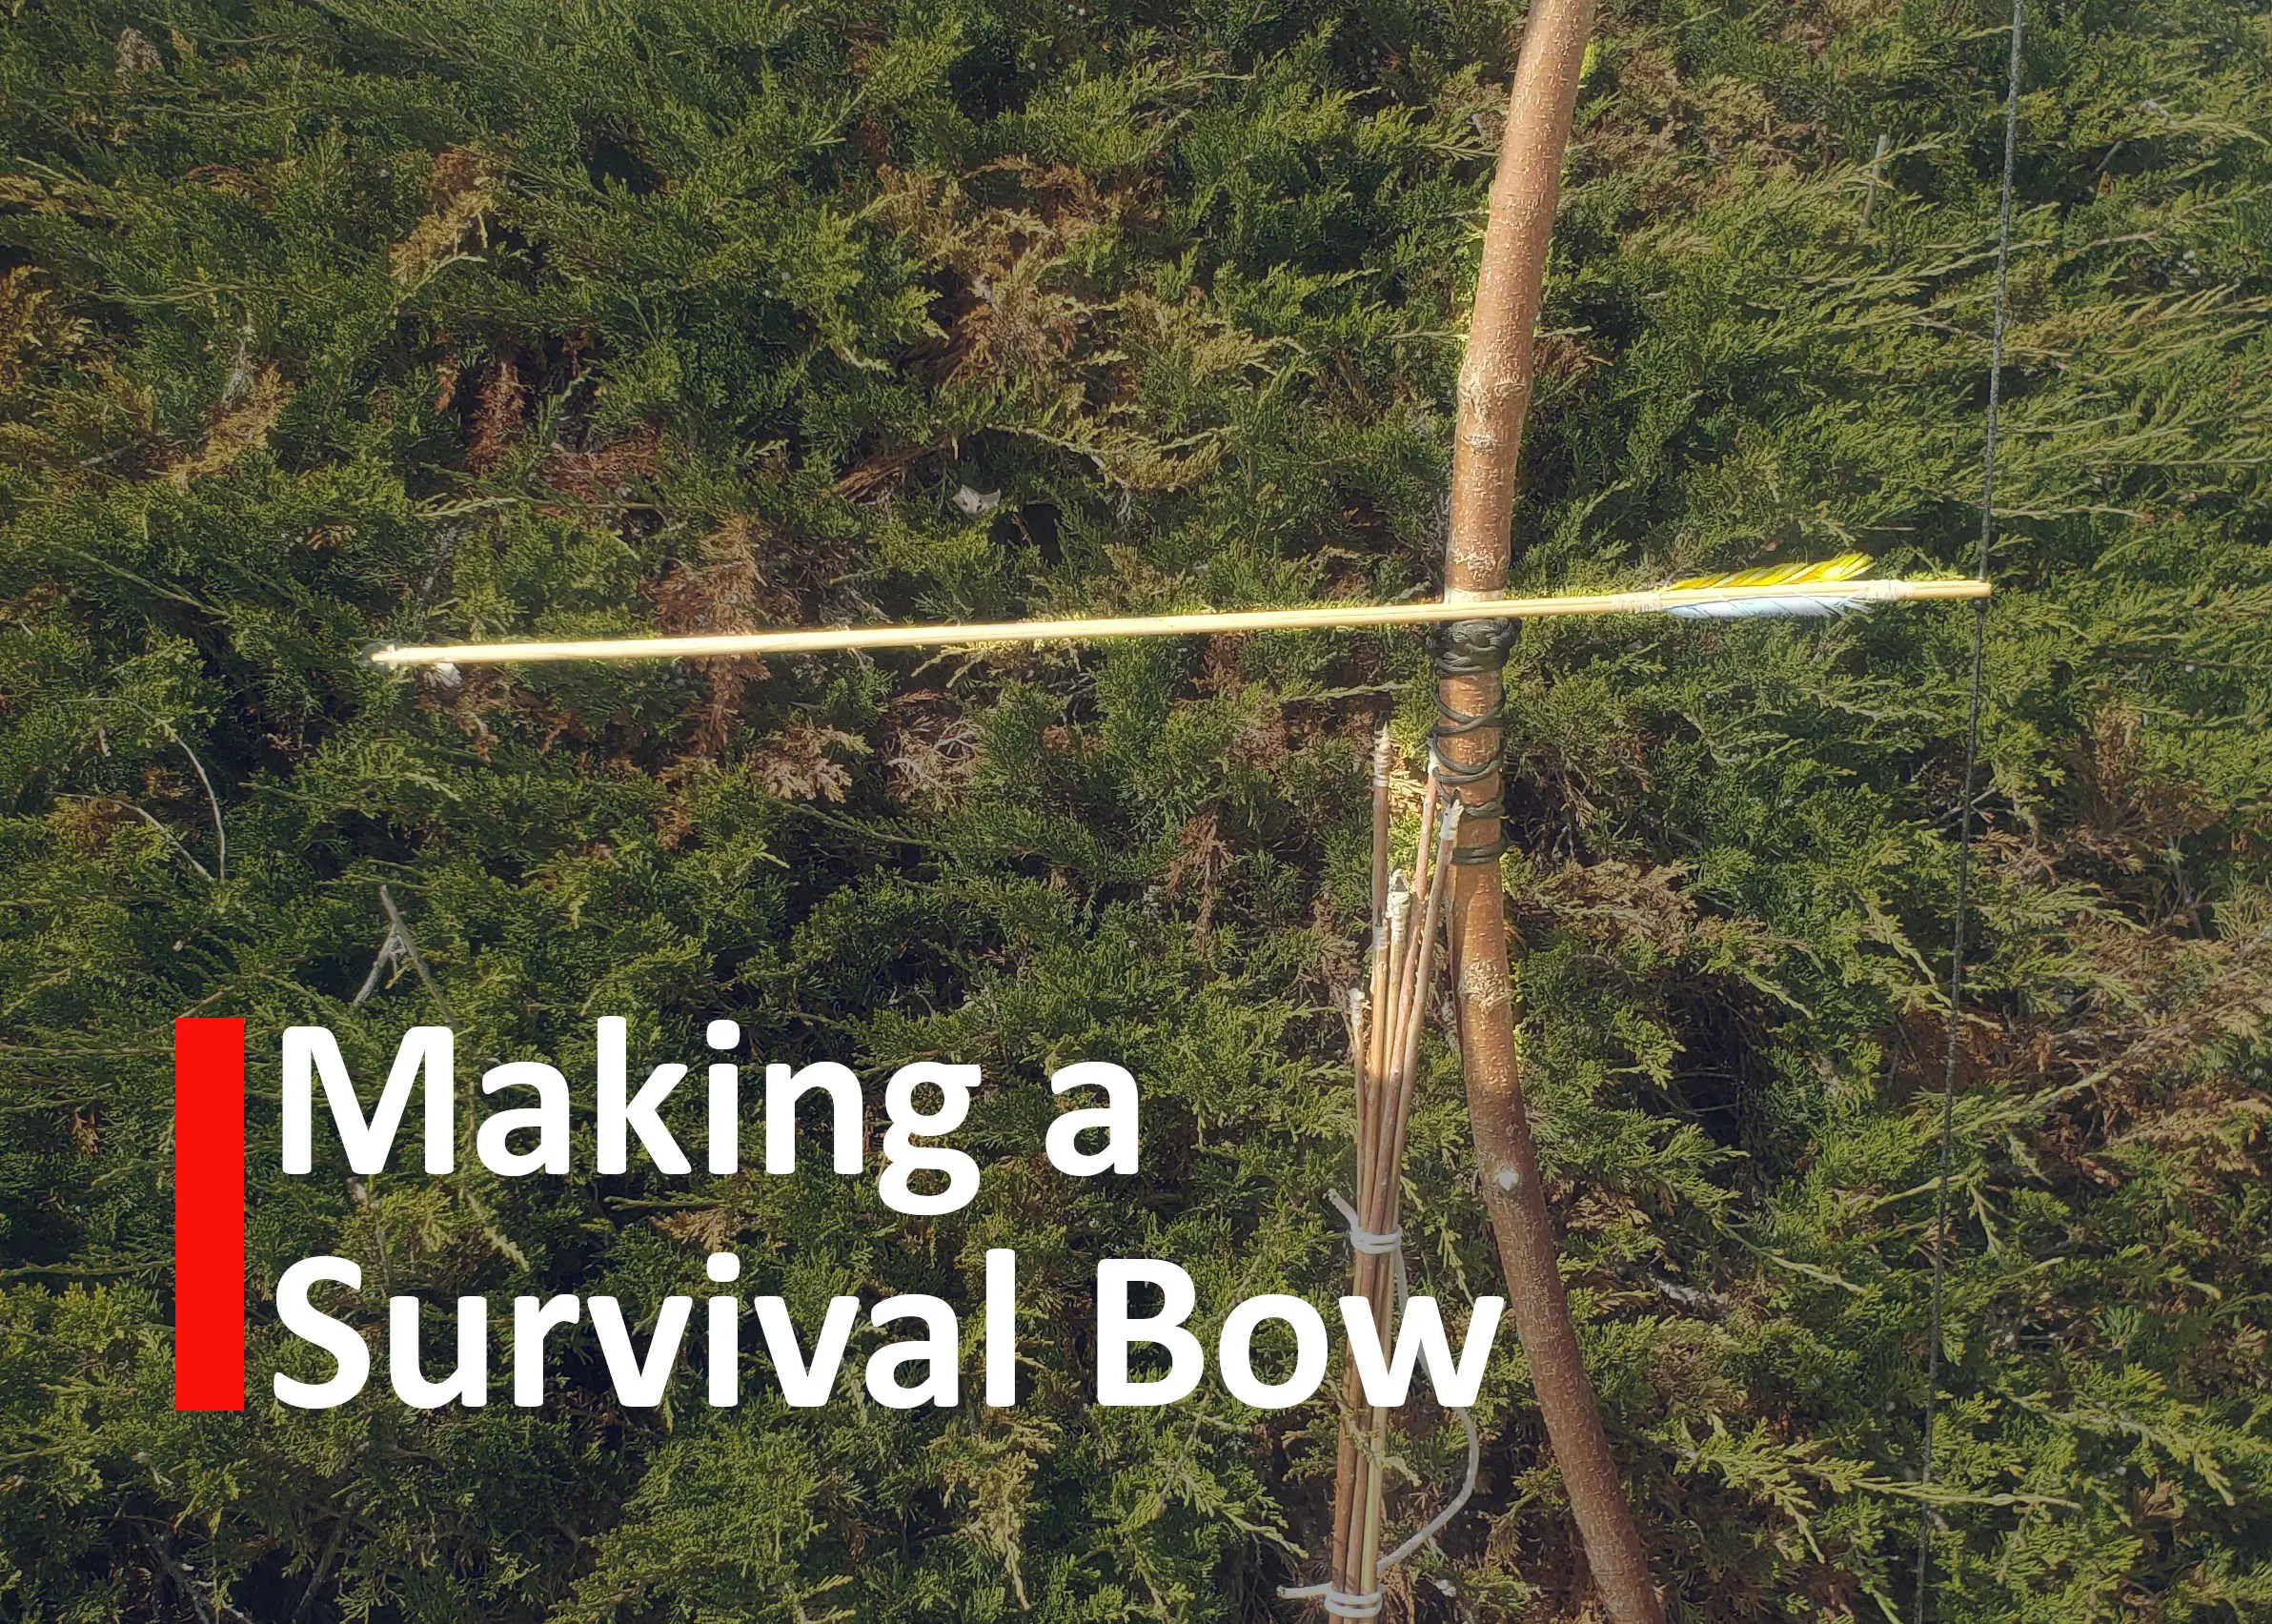 Making a survival bow and arrow title image